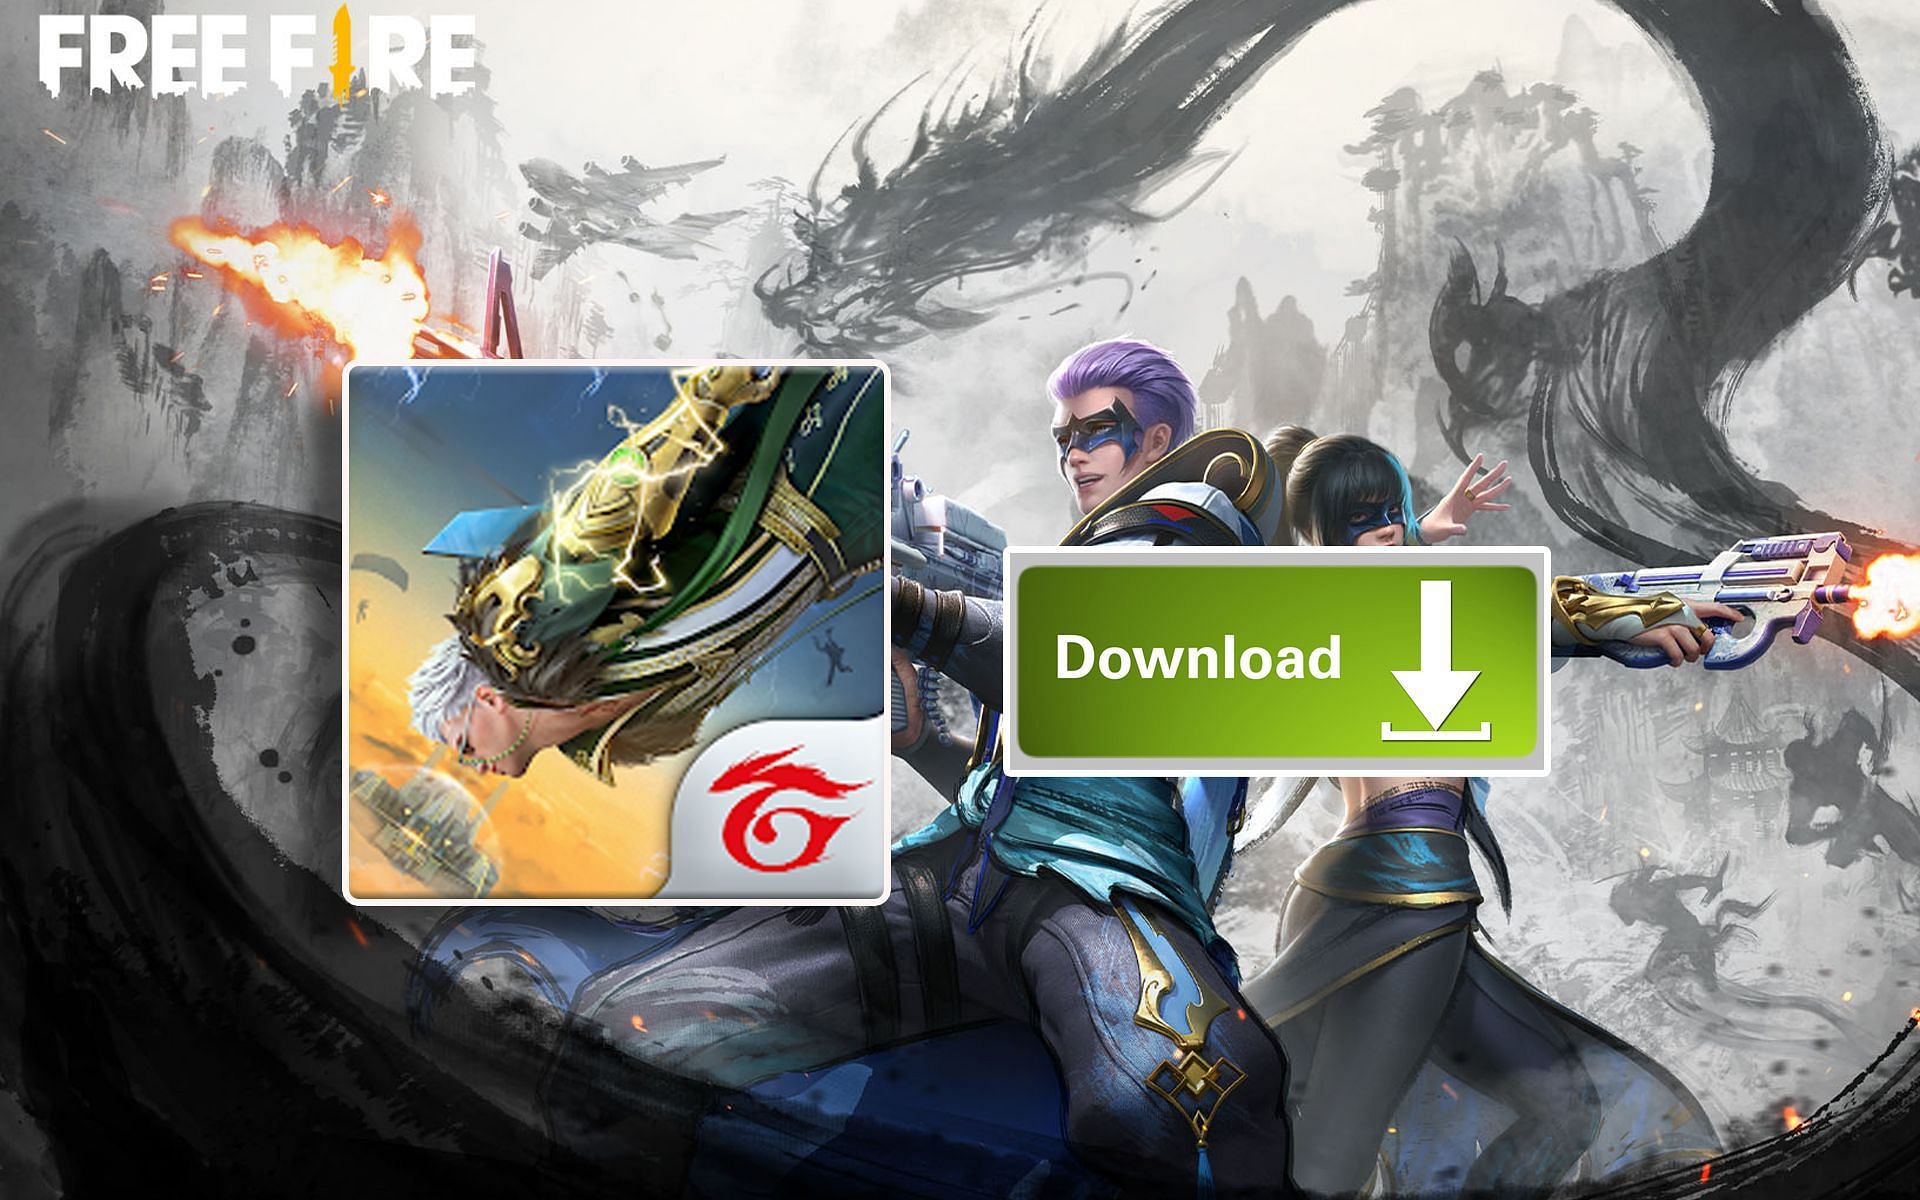 Users may download the game using the APK (Image via Sportskeeda)